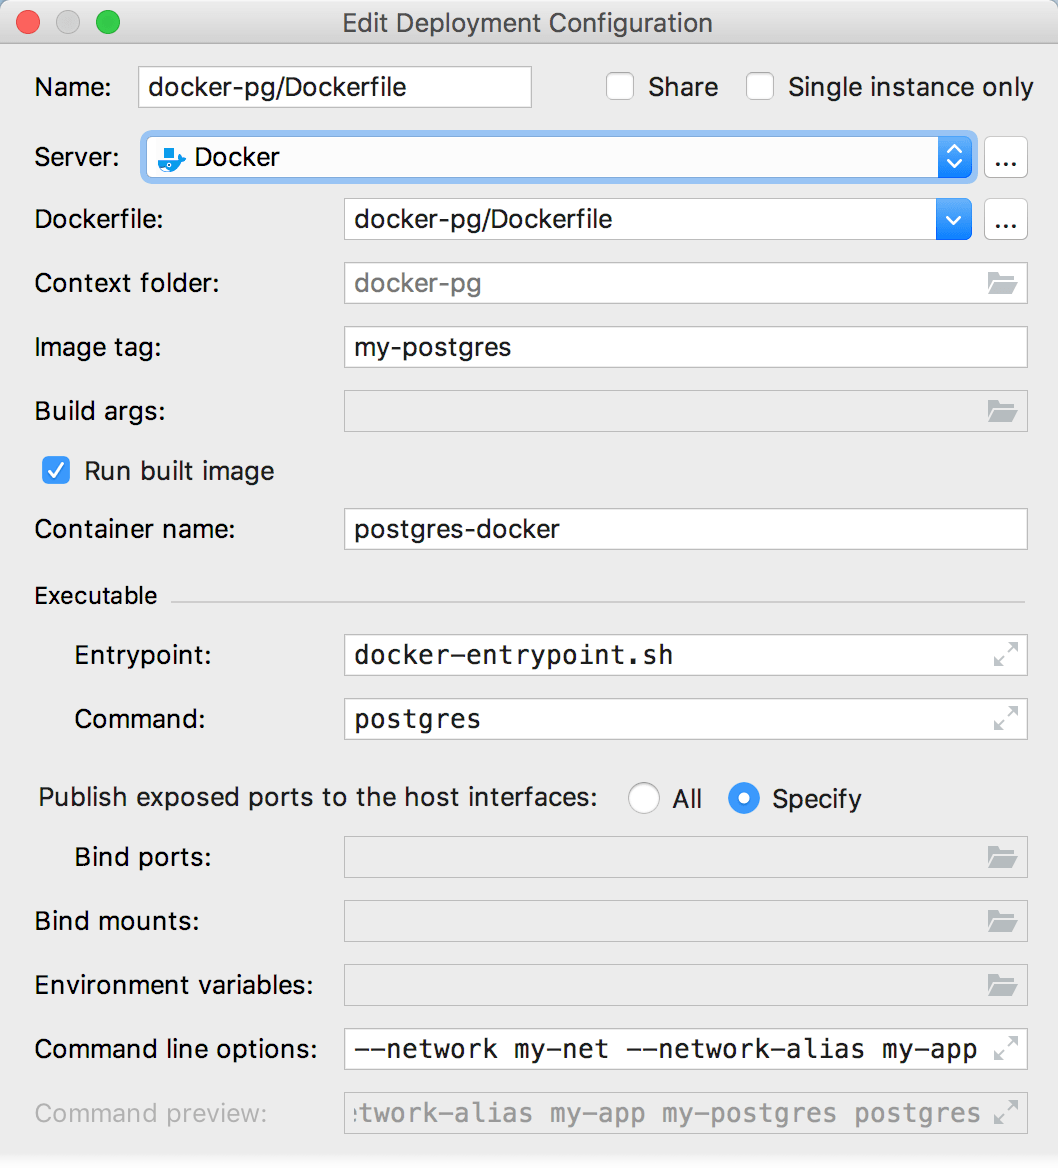 The Edit Deployment Configuration dialog with command-line options